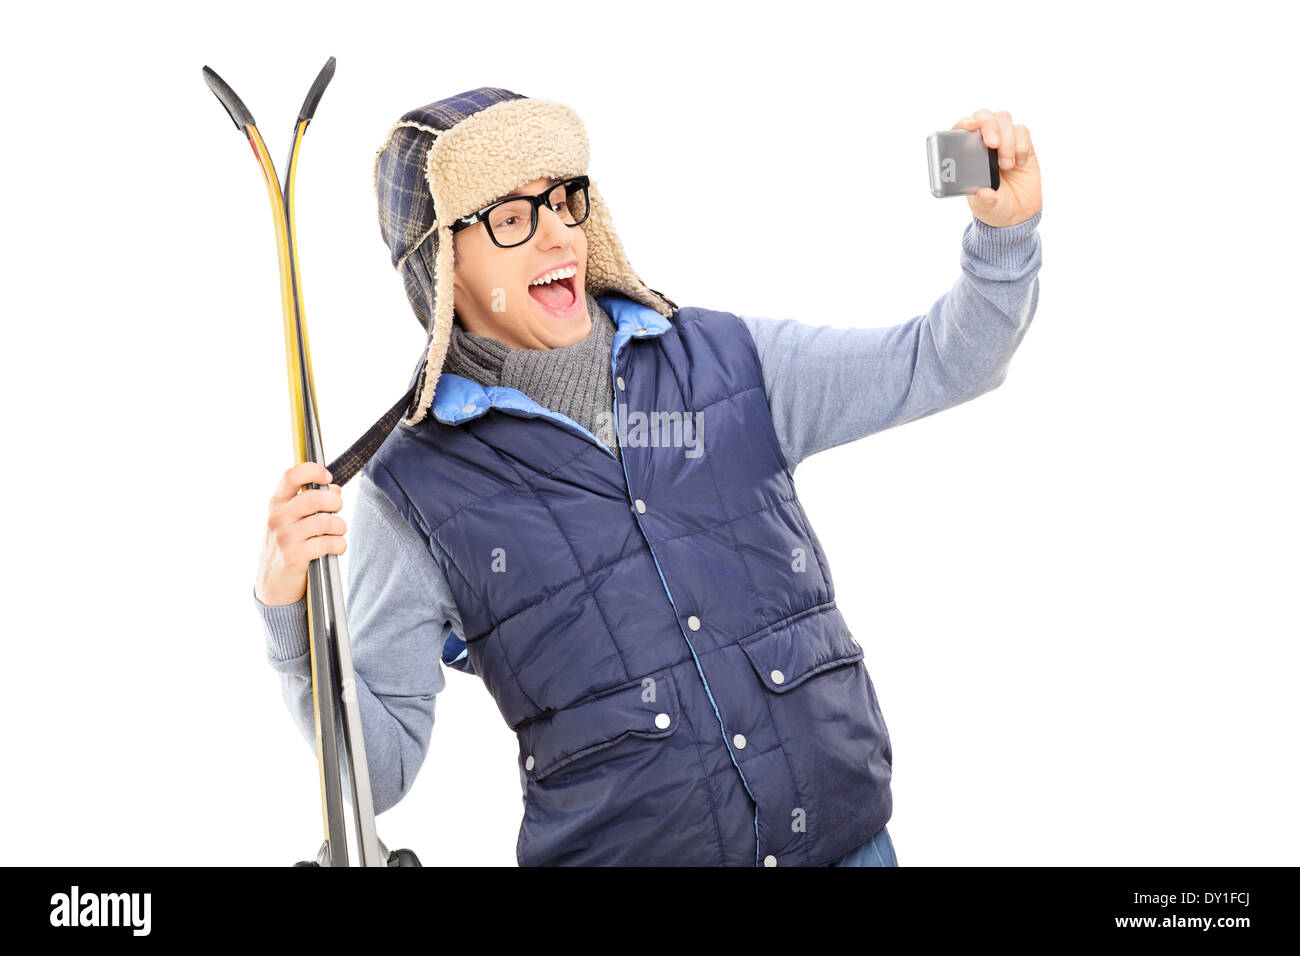 Man in winter clothes taking a selfie with skis Stock Photo